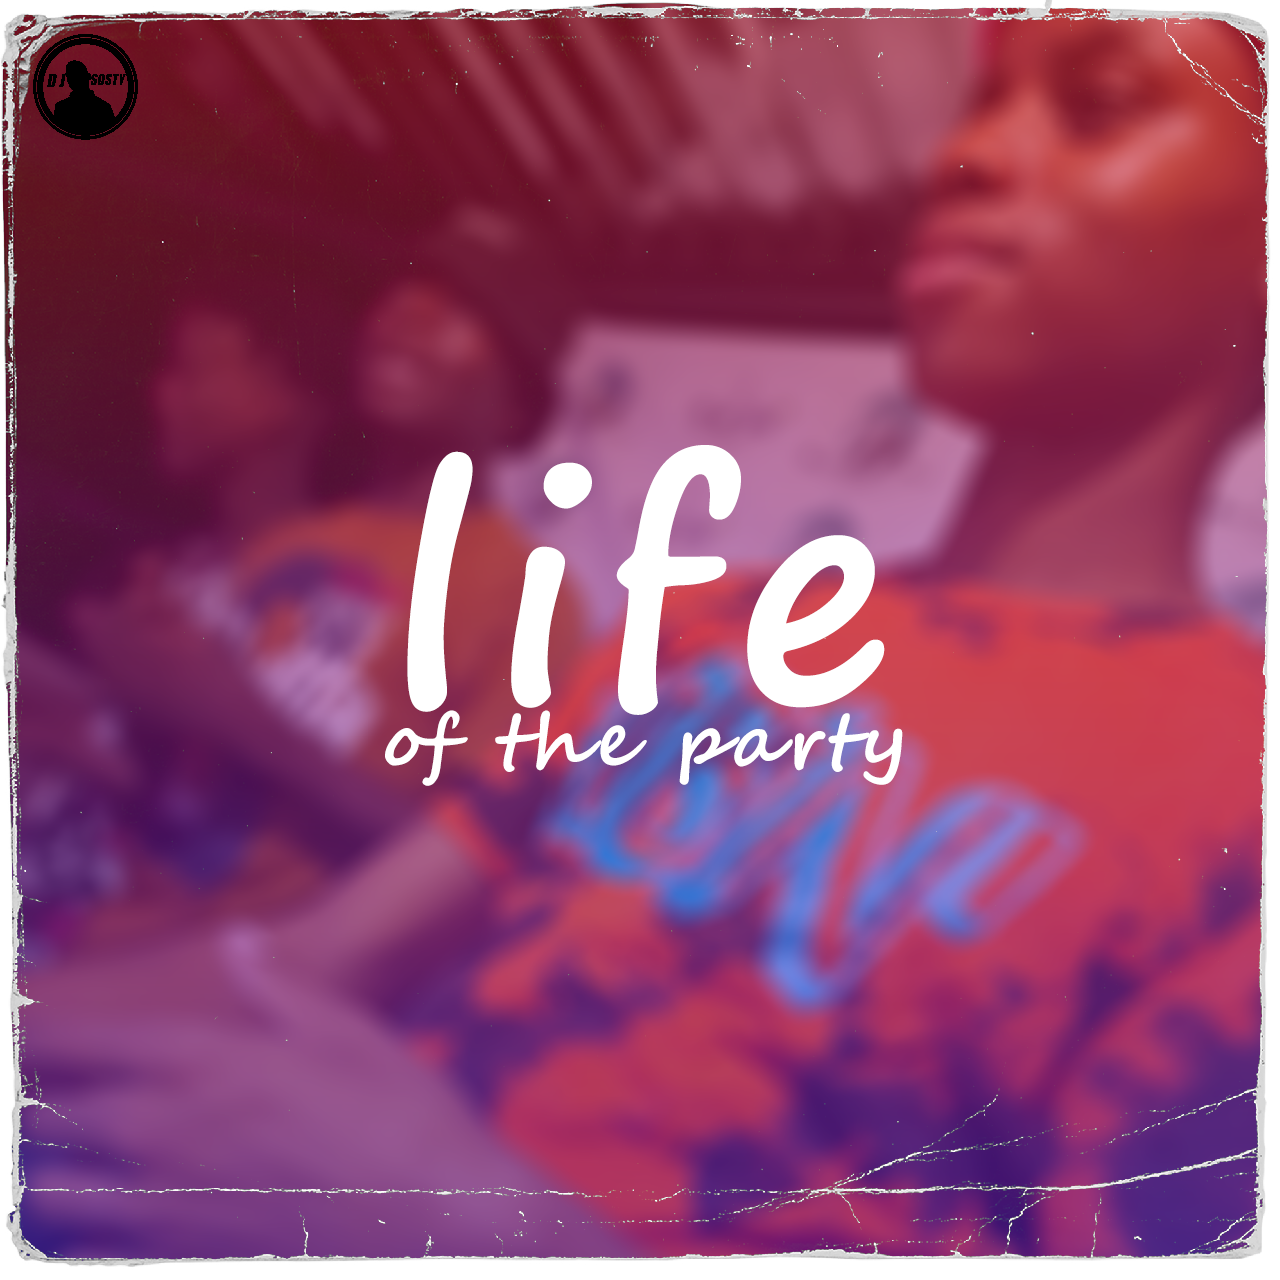 Life Of the party Image